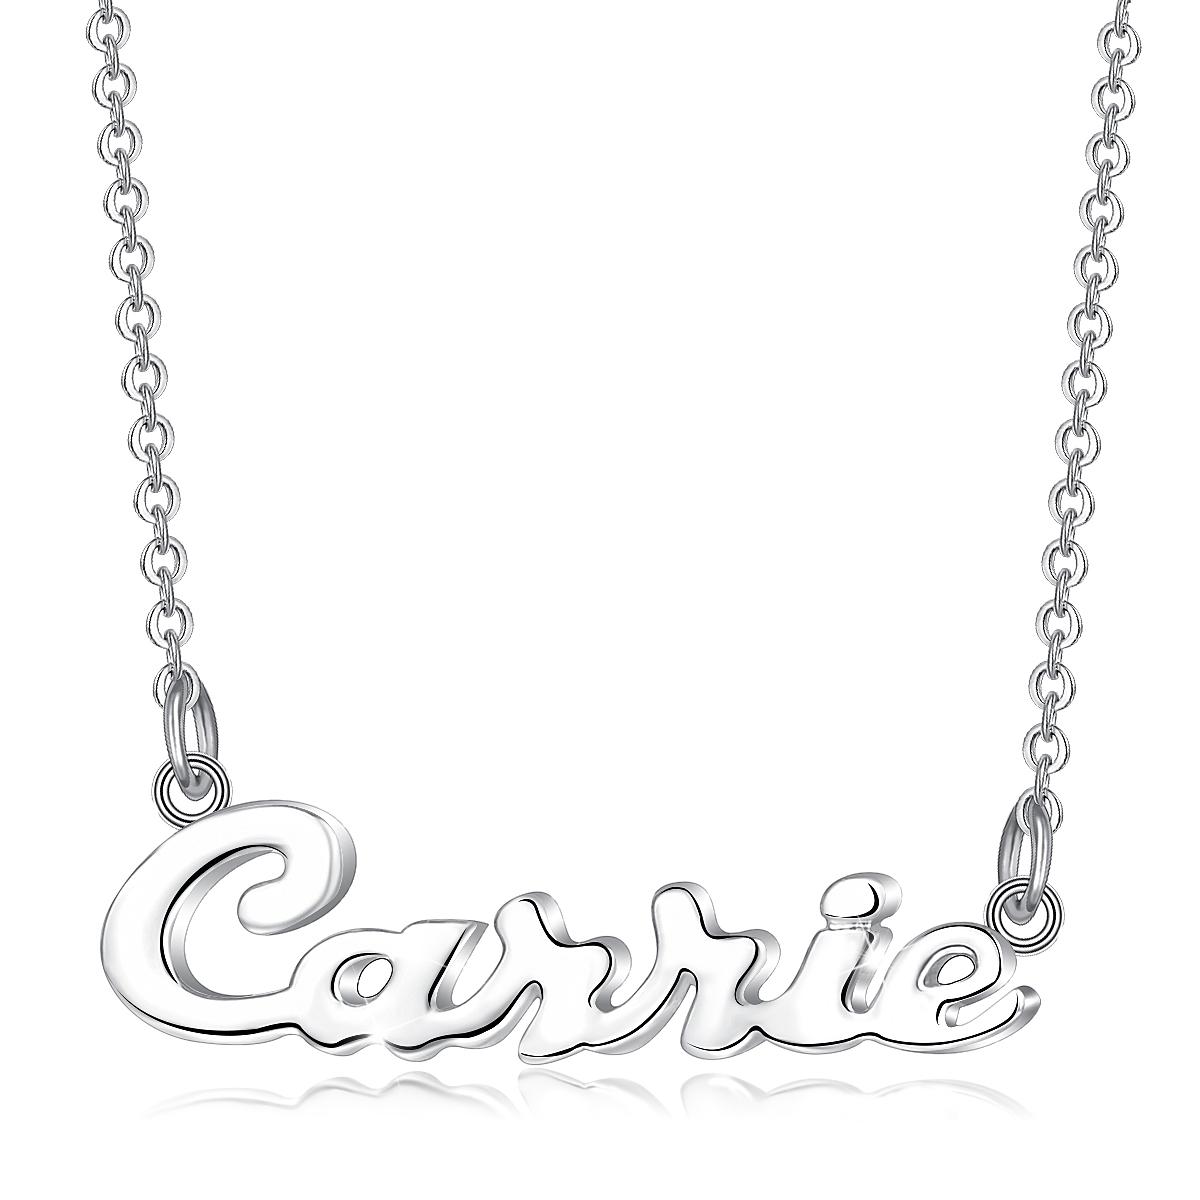 Merryshine Jewelry Wholesale Vendor Alphabet Letter Personalized Custom Jewelry 925 Sterling Silver Name Plate Necklace